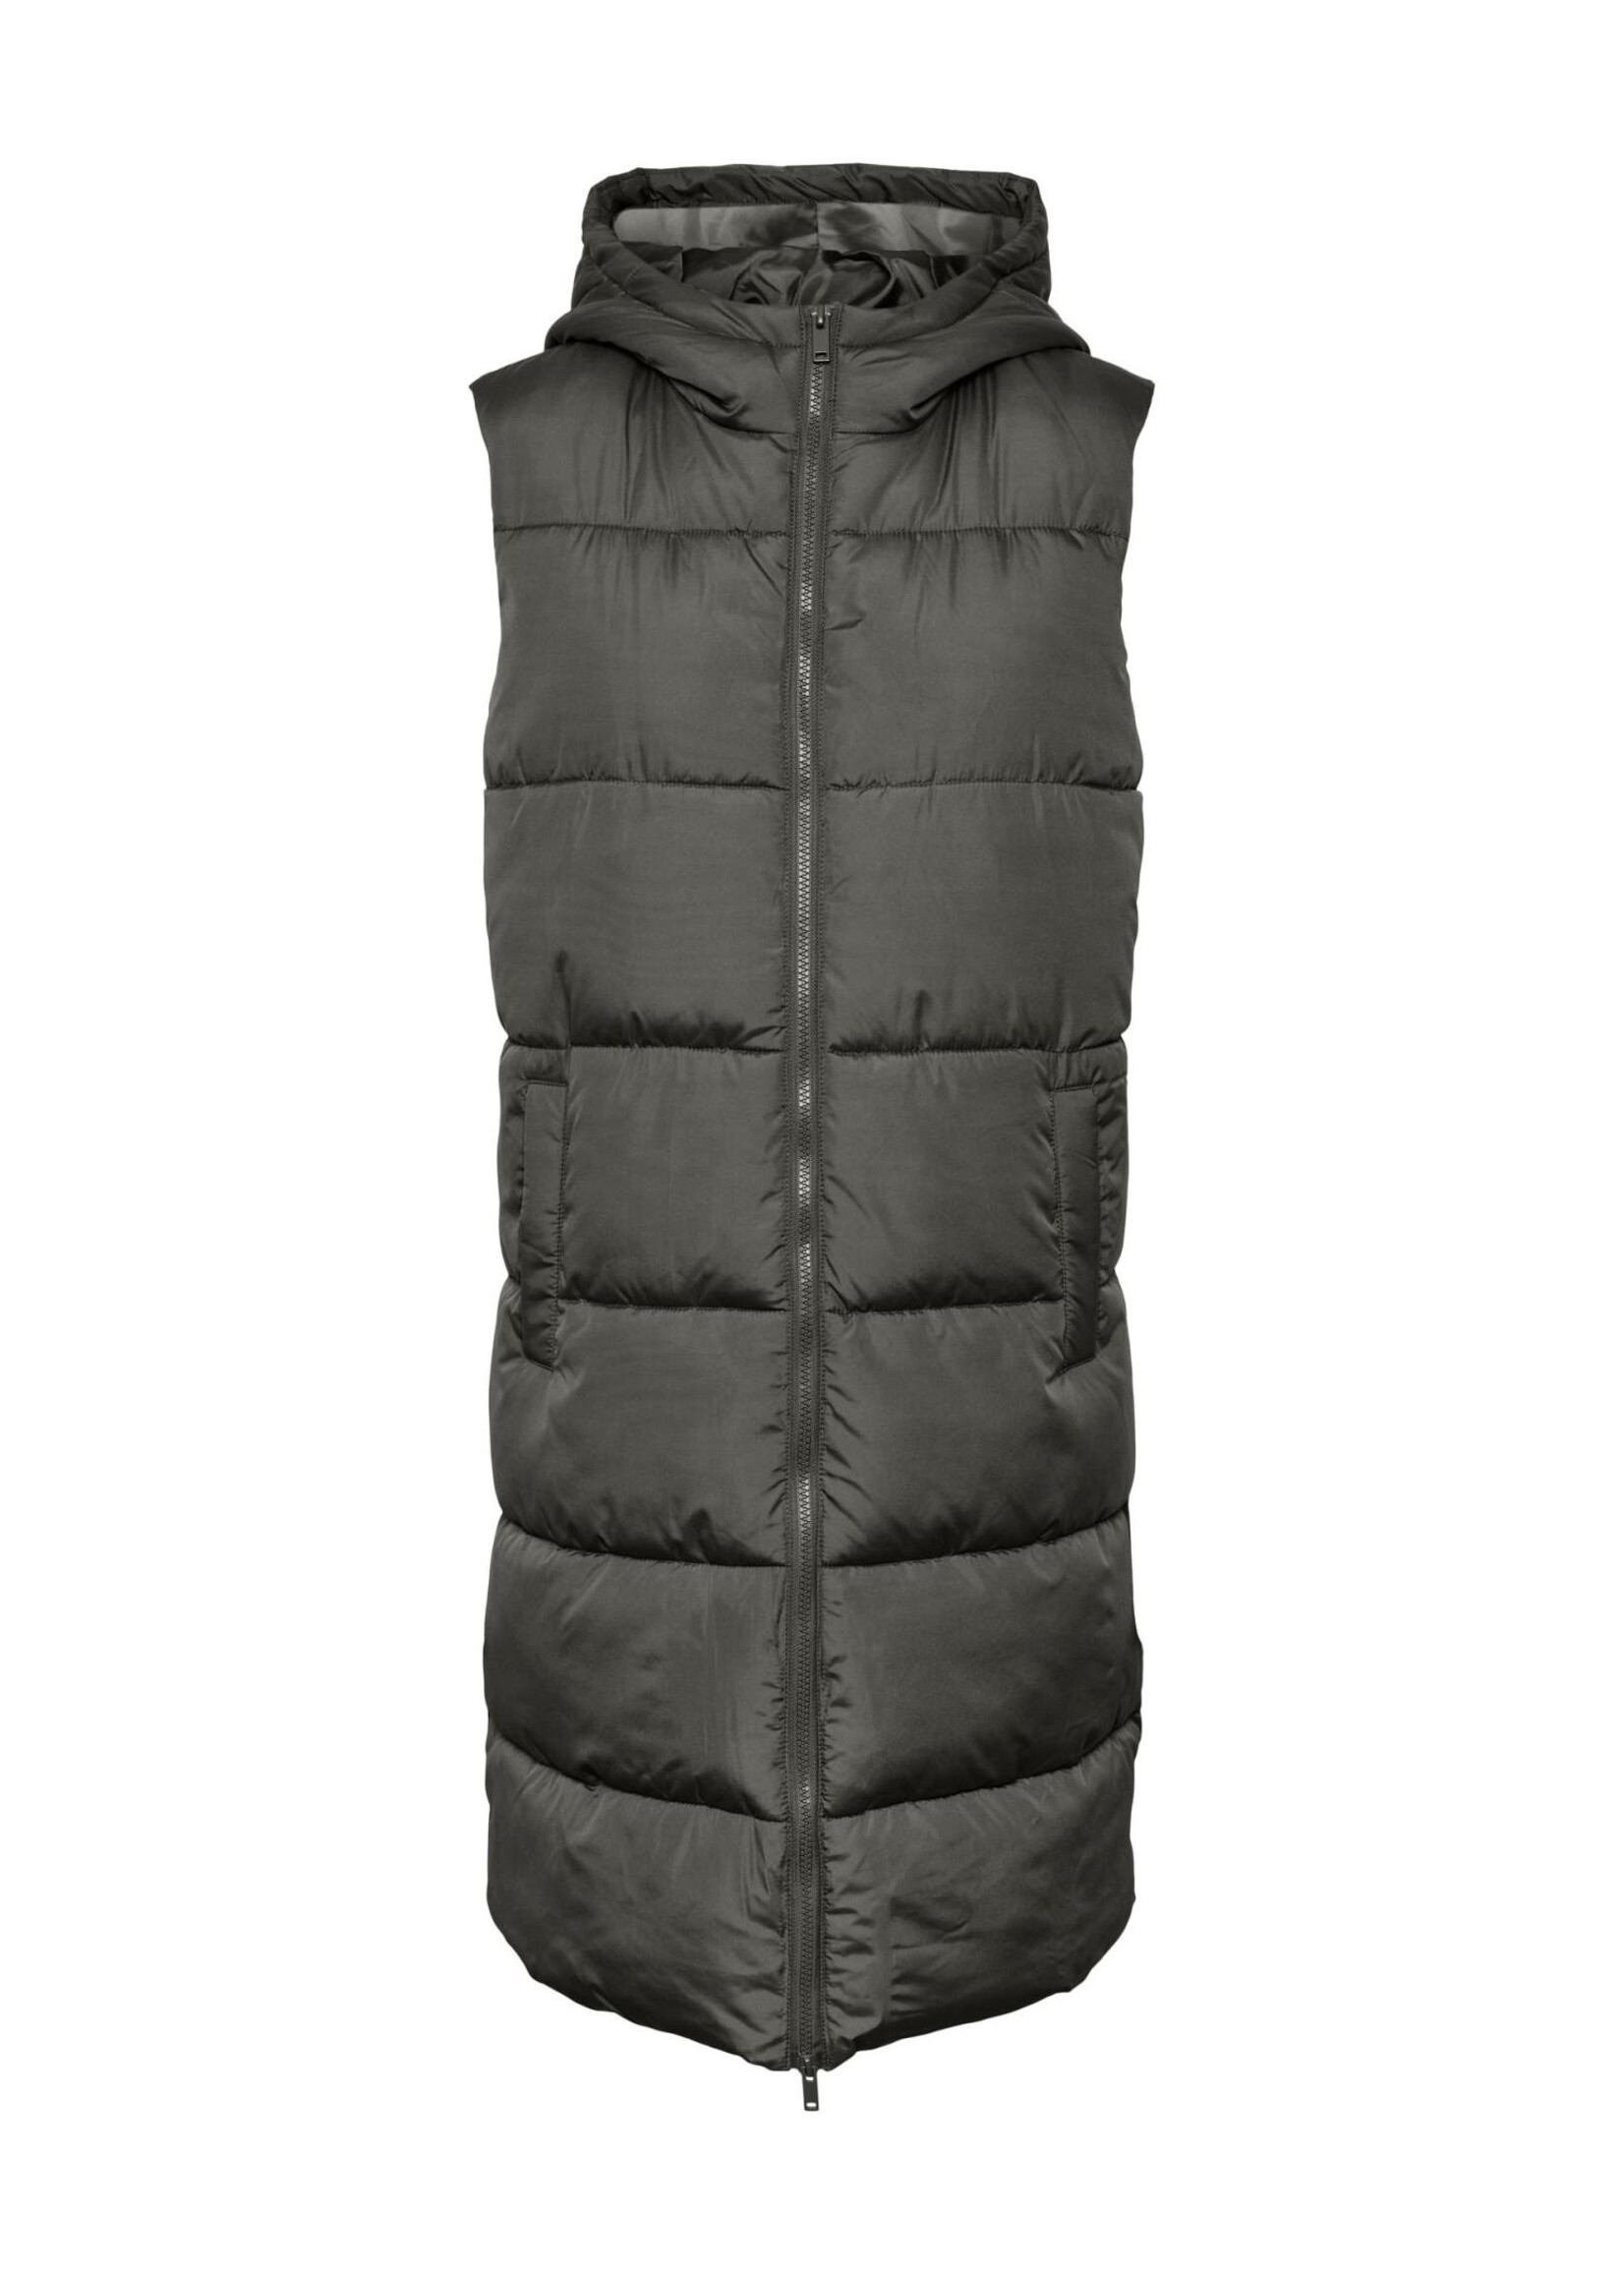 PIECES BEE NEW LONG PUFFER VEST BC black olive